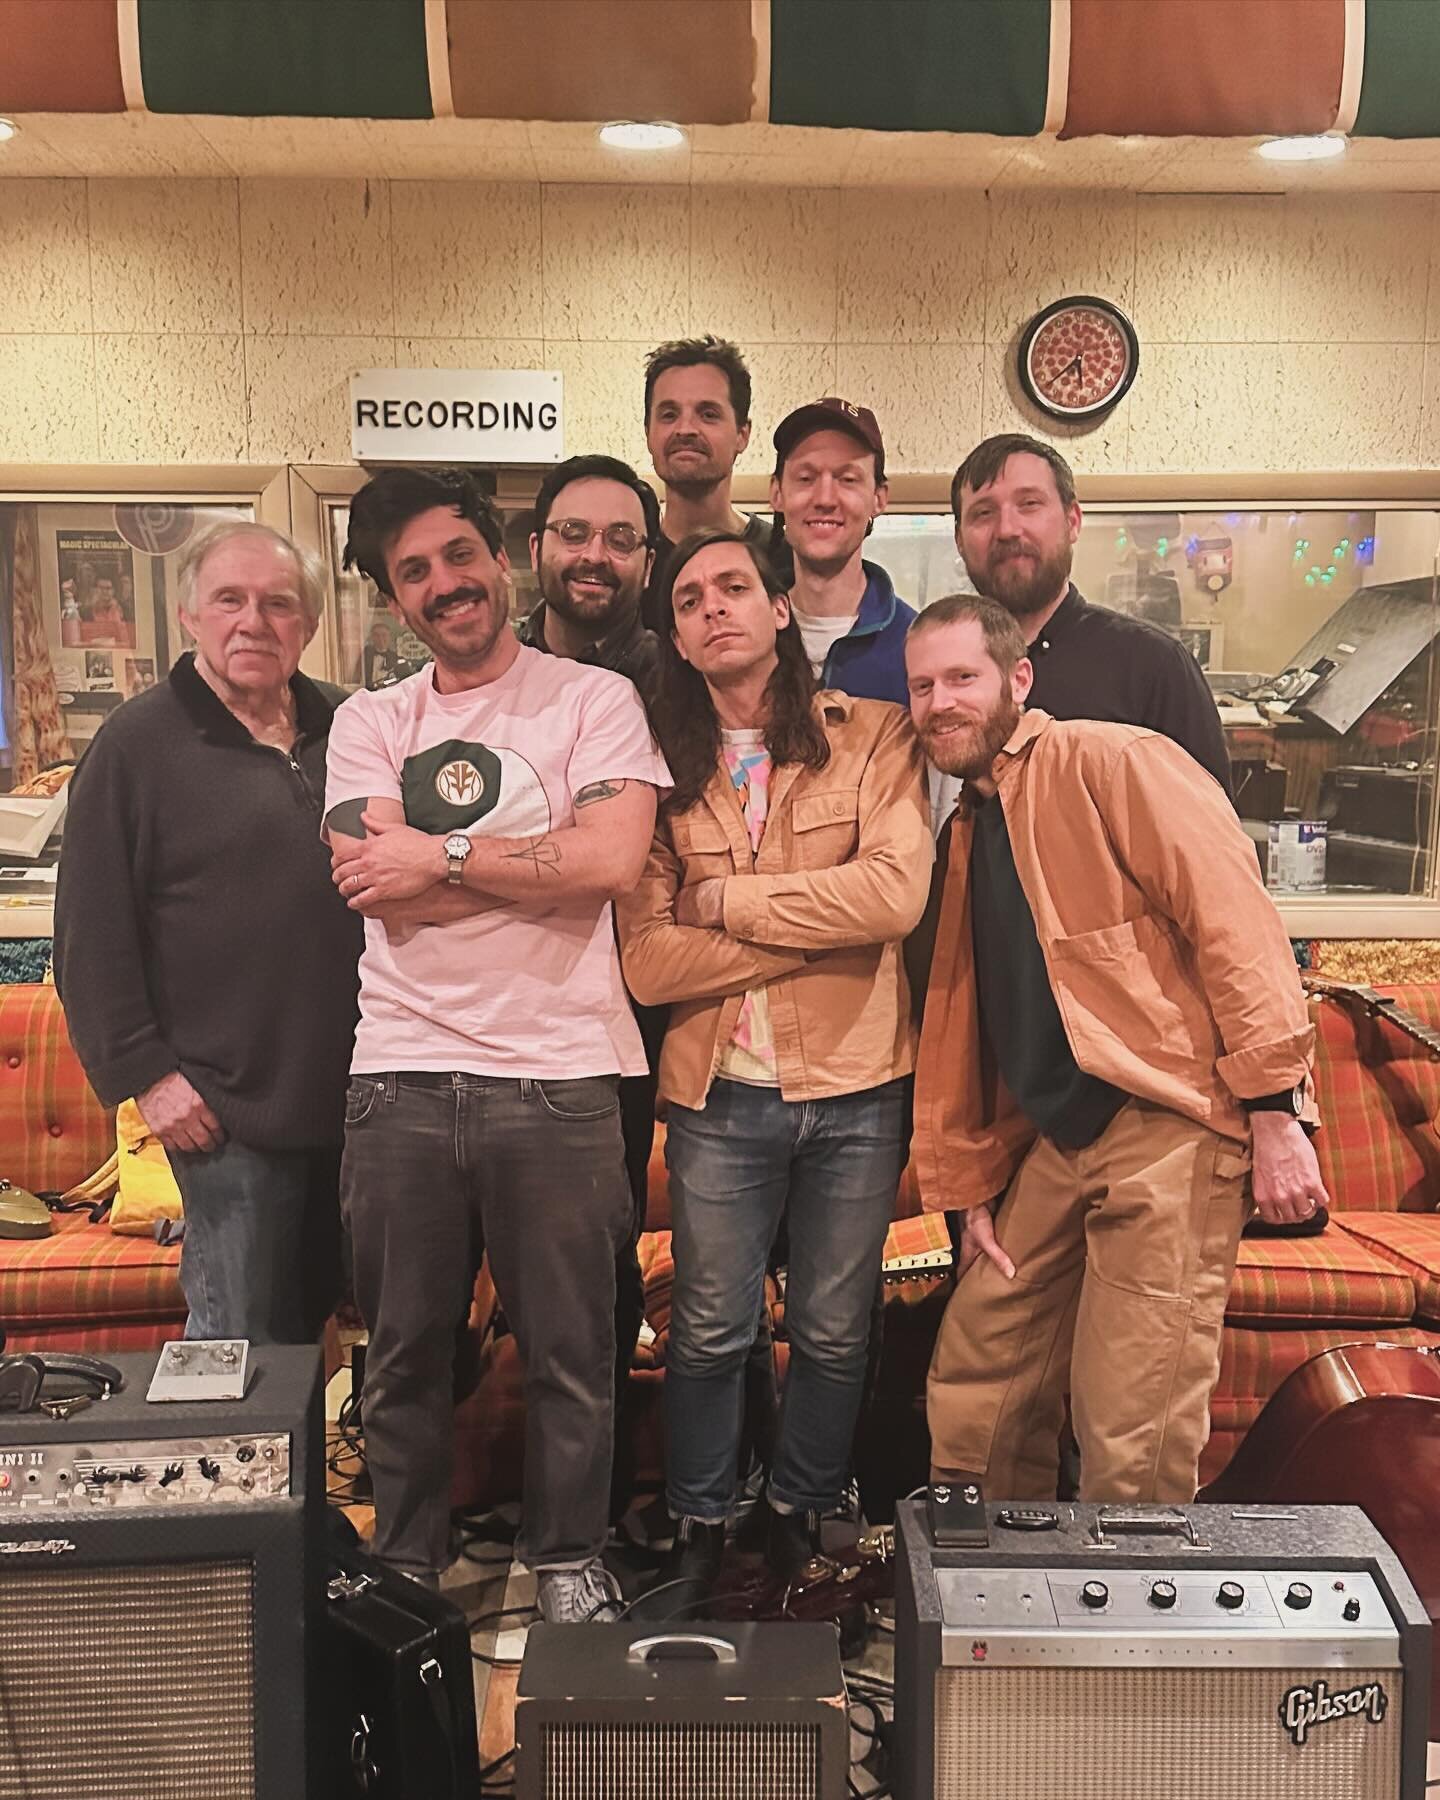 &bull; made a record with this crew of fine gentleman last weekend @peppermintproductions &bull; I&rsquo;m still high from all the laughter, positive energy and brotherly love - and WOW, the music was sublime! These are some of my best friends and lo